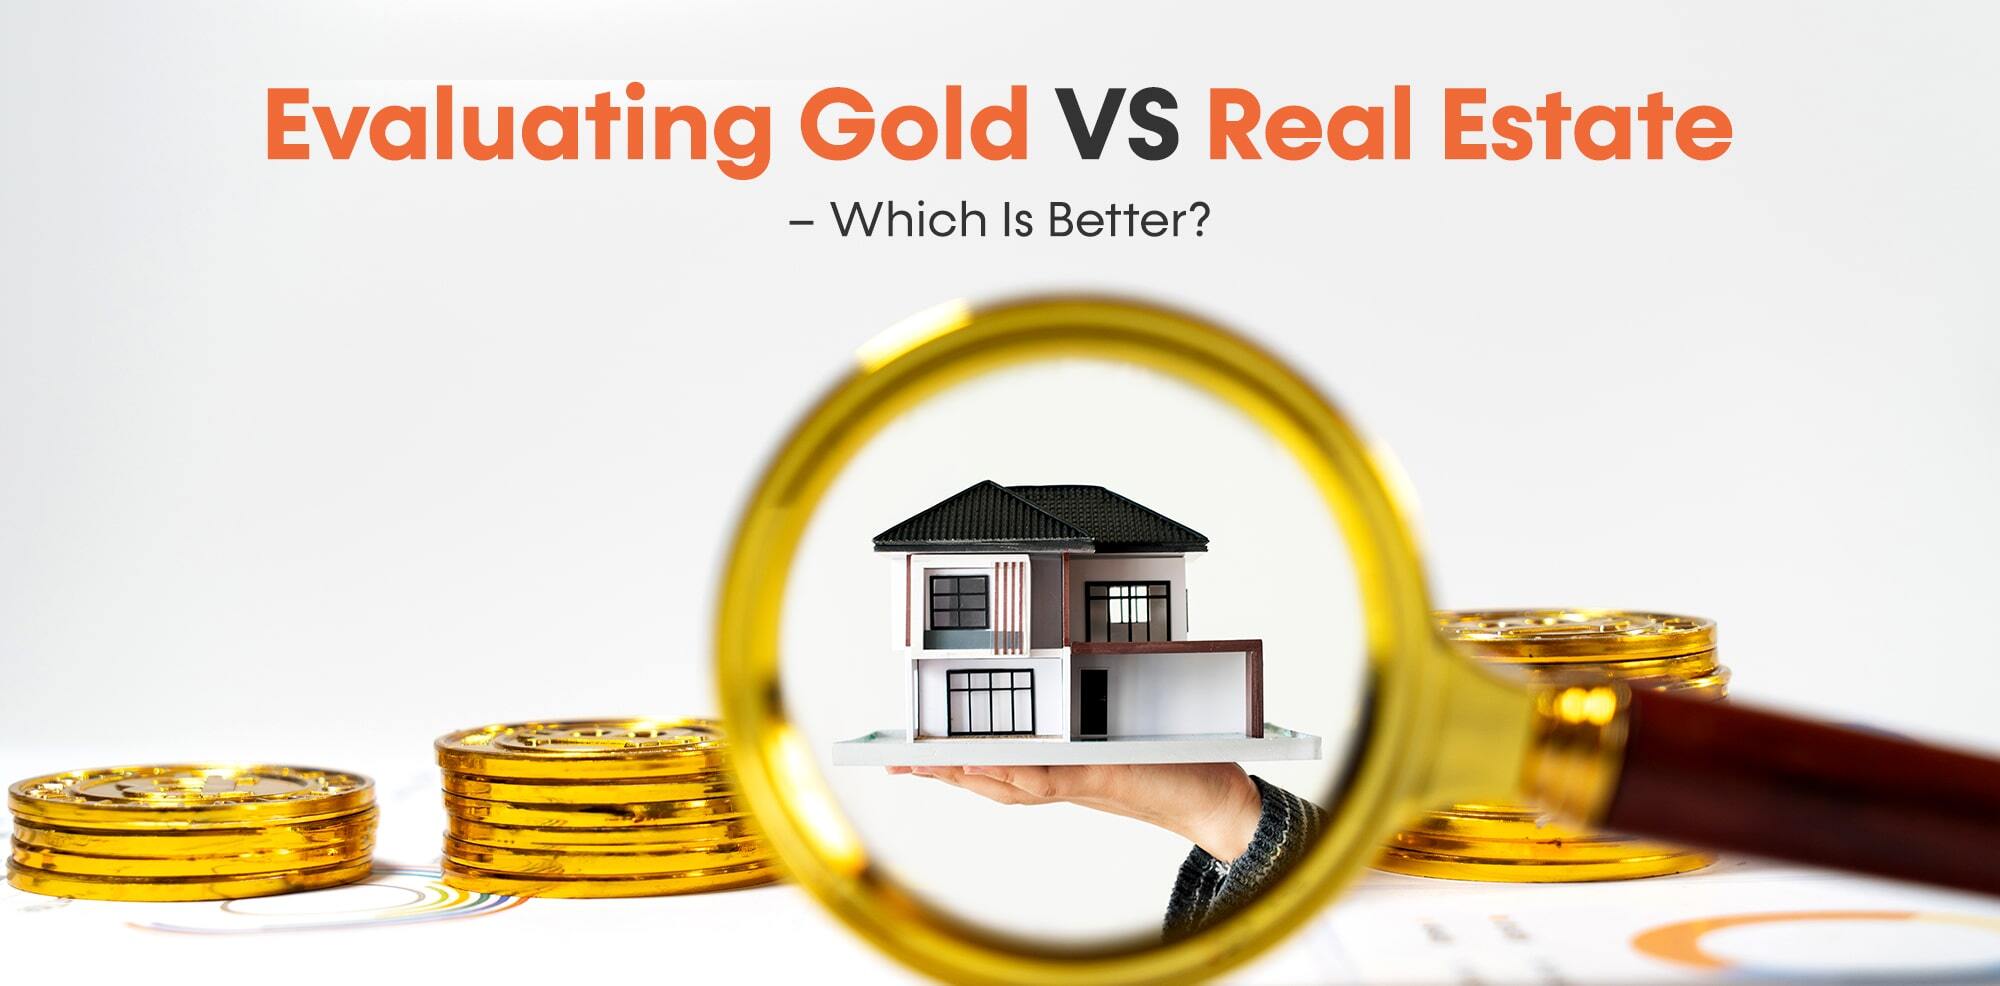 Evaluating Gold vs. Real Estate: Which Is Better?